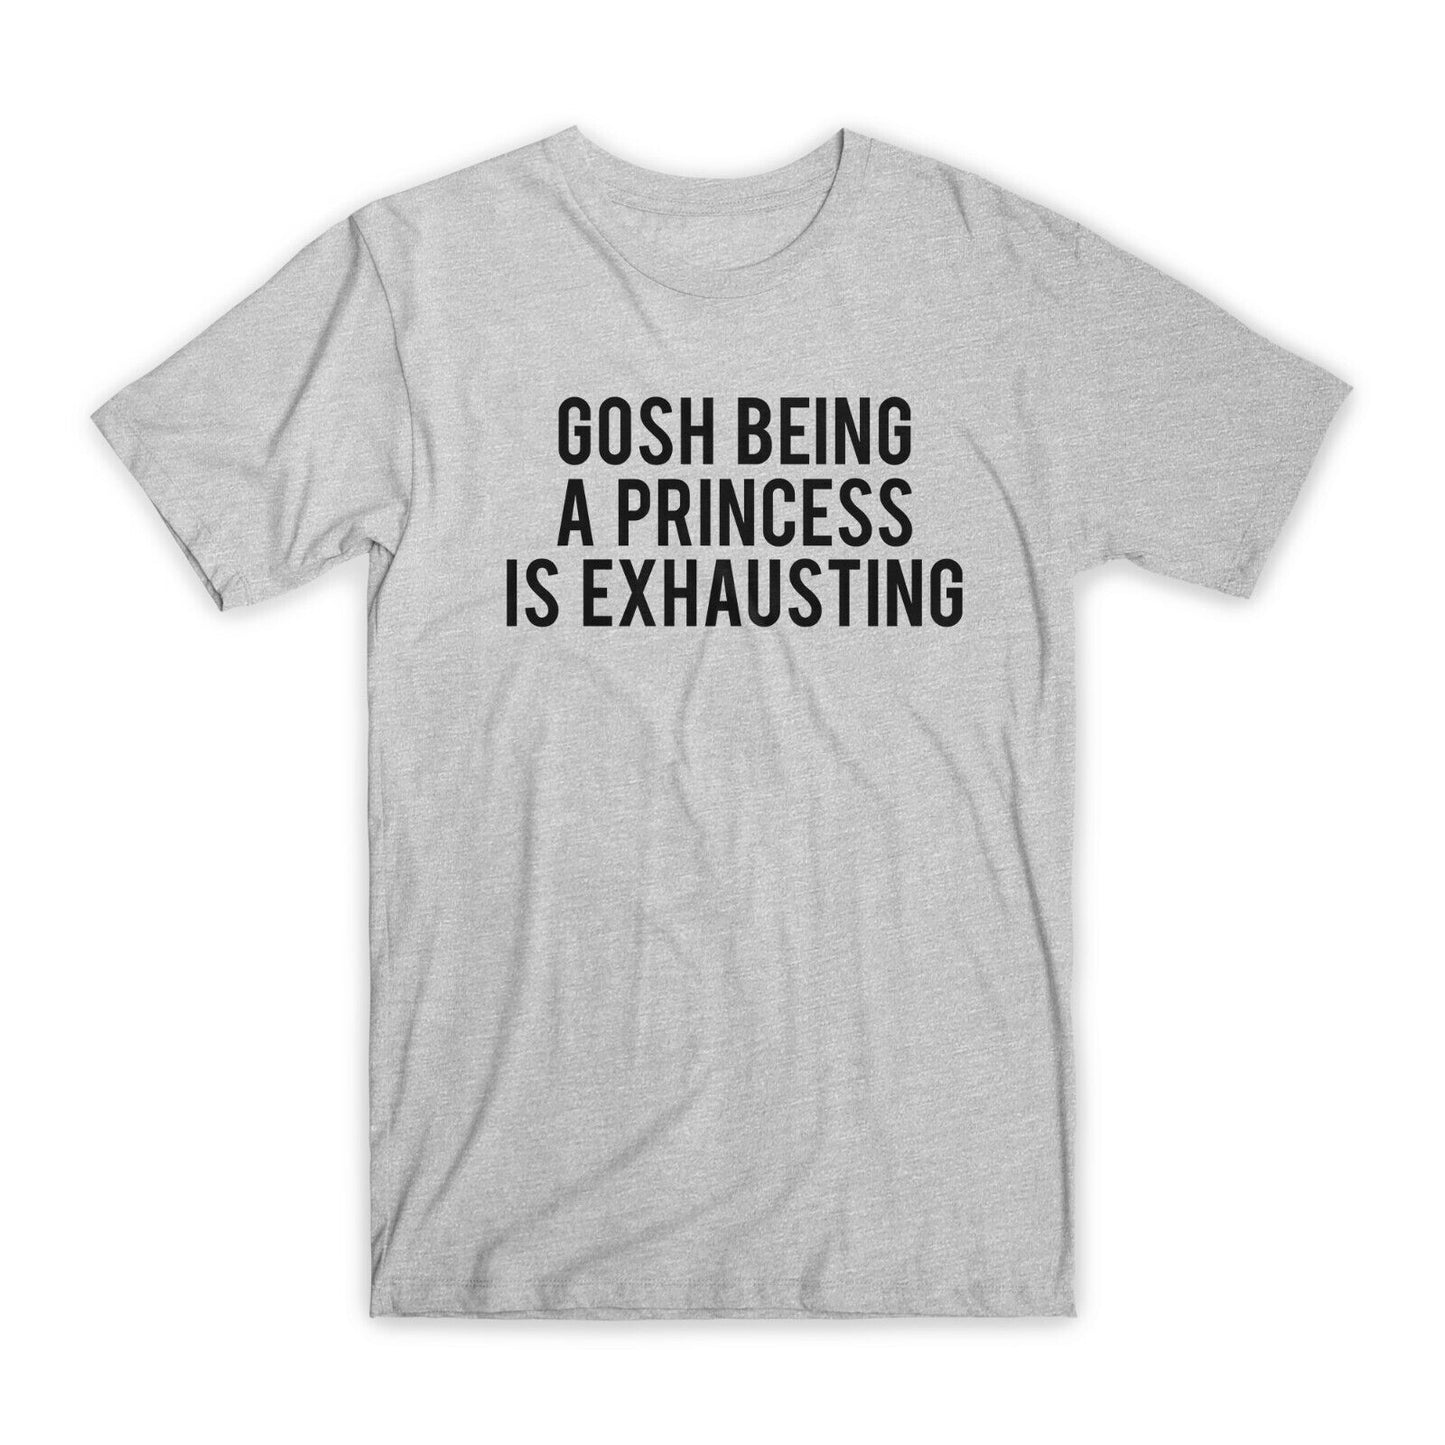 Gosh Being A Princess is Exhausting T-Shirt Premium Soft Cotton Funny T Gift NEW